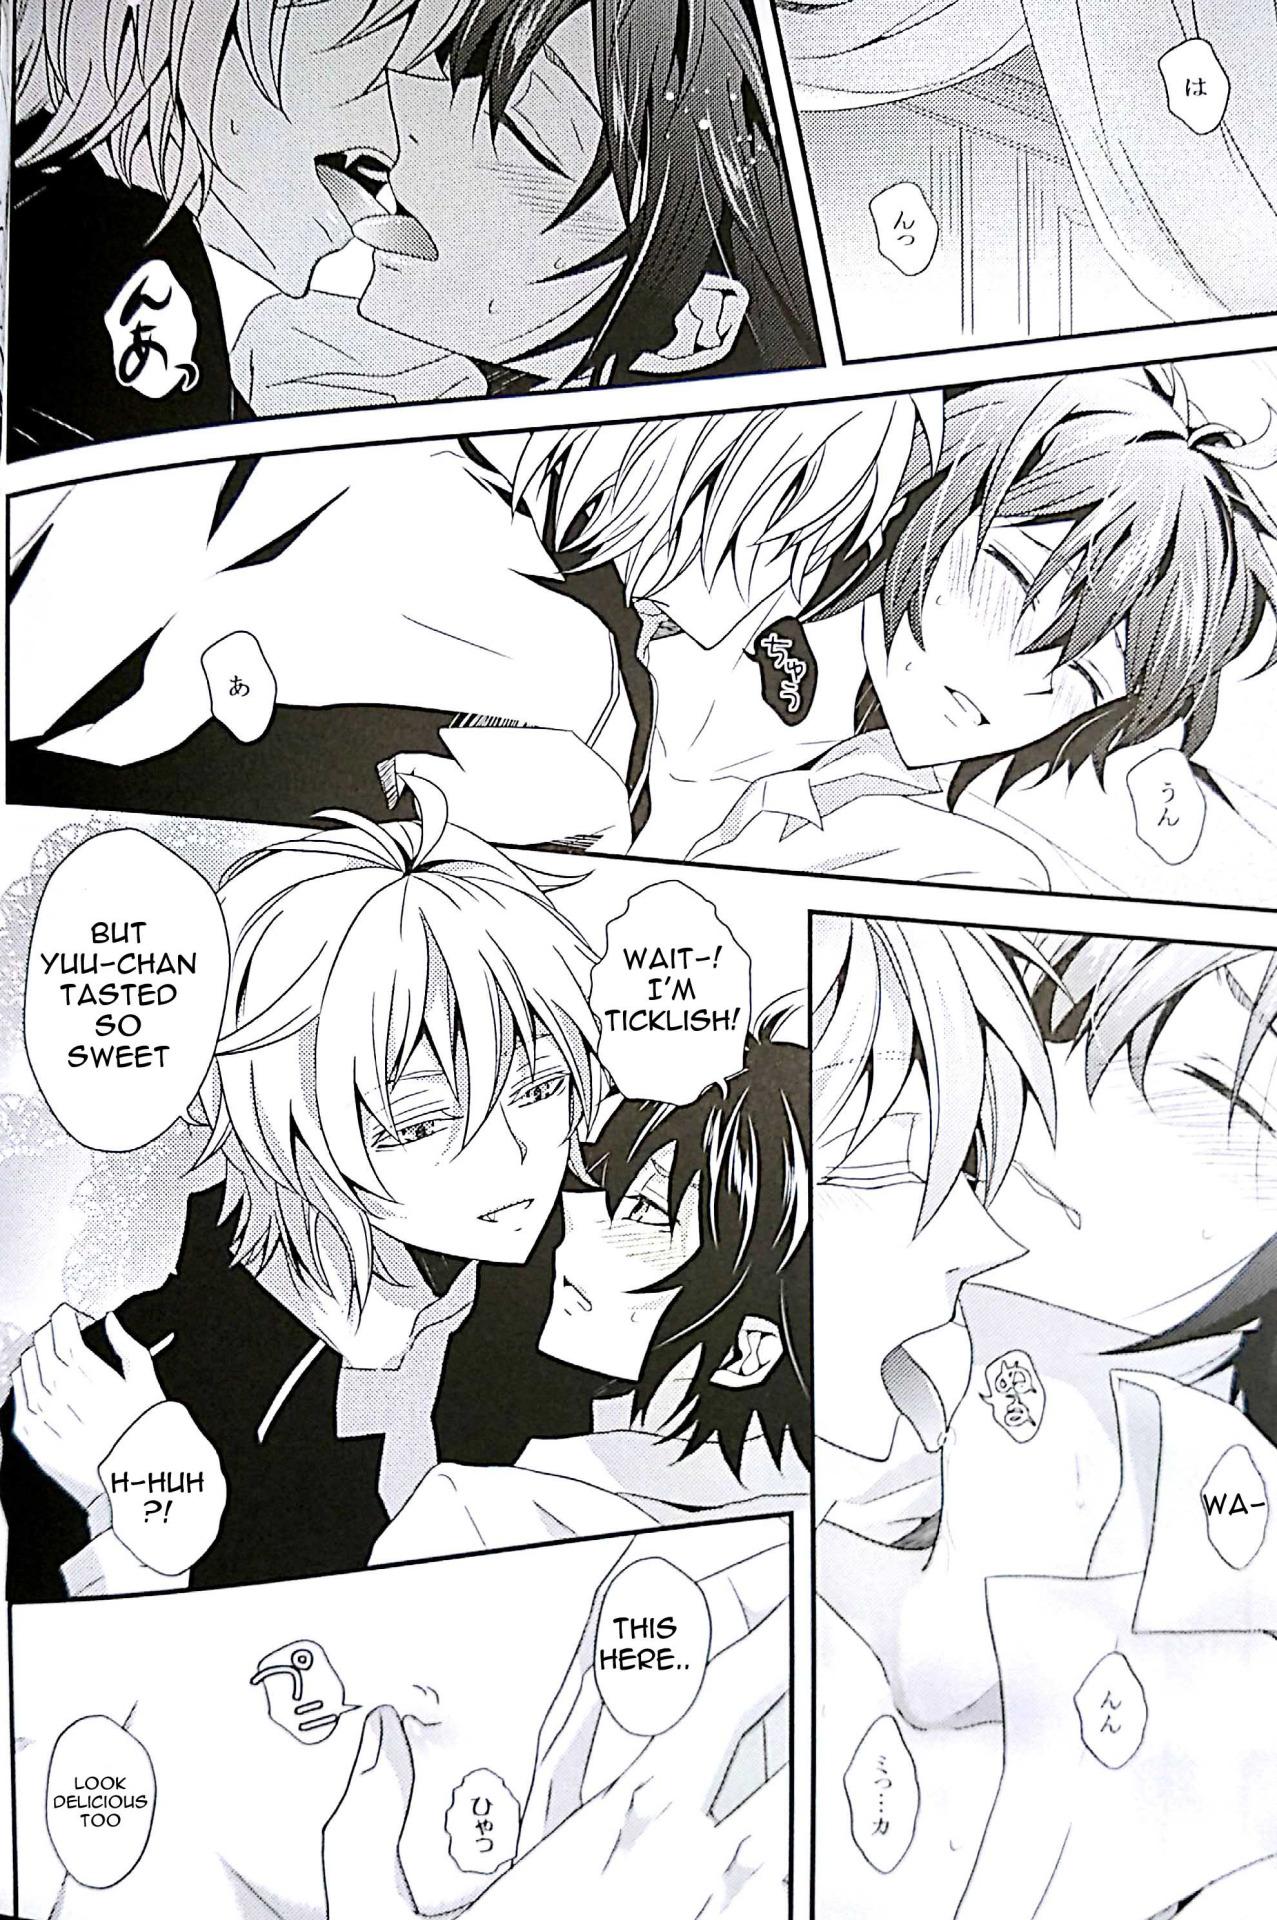 Women Sucking Dick Thirst for blood - Seraph of the end Gayfuck - Page 12